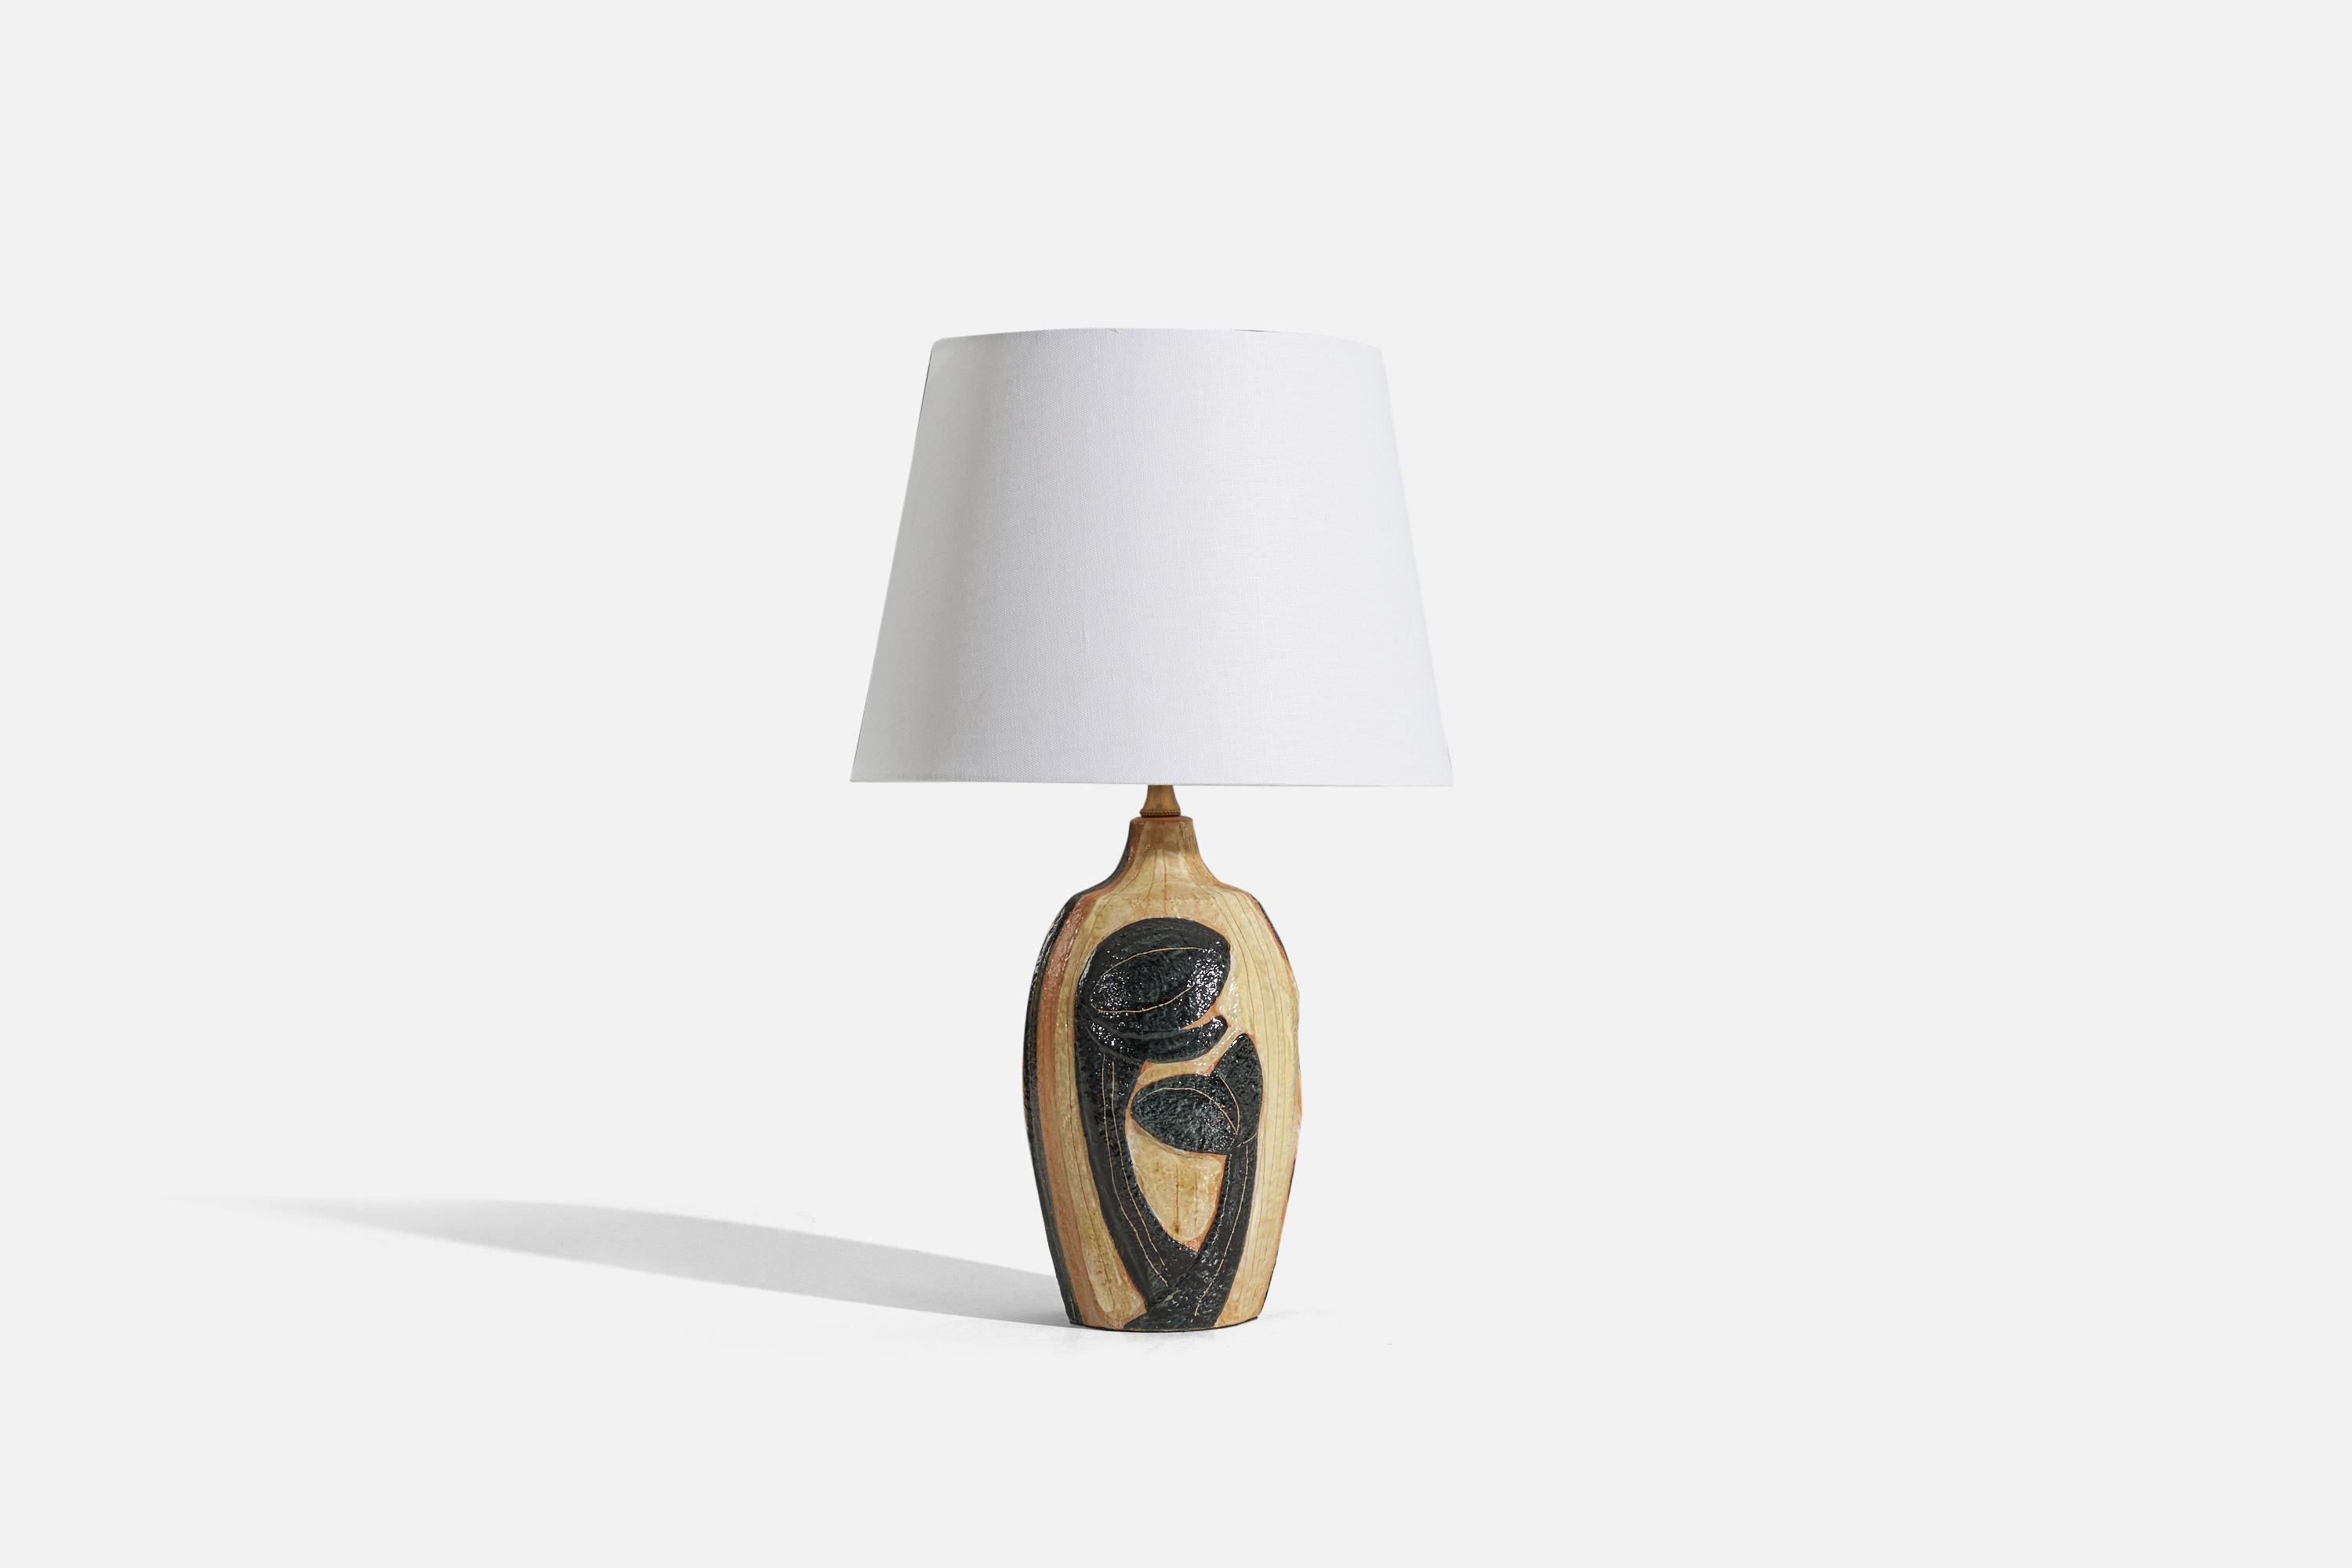 A glazed stoneware table lamp designed by Noomi Backhausen and produced by Søholm Keramik, Bornholm, Denmark, c. 1960s. 

Sold without lampshade. 
Dimensions of Lamp (inches) : 14.1875 x 5.75 x 5.75 (H x W x D)
Dimensions of Shade (inches) : 9 x 12